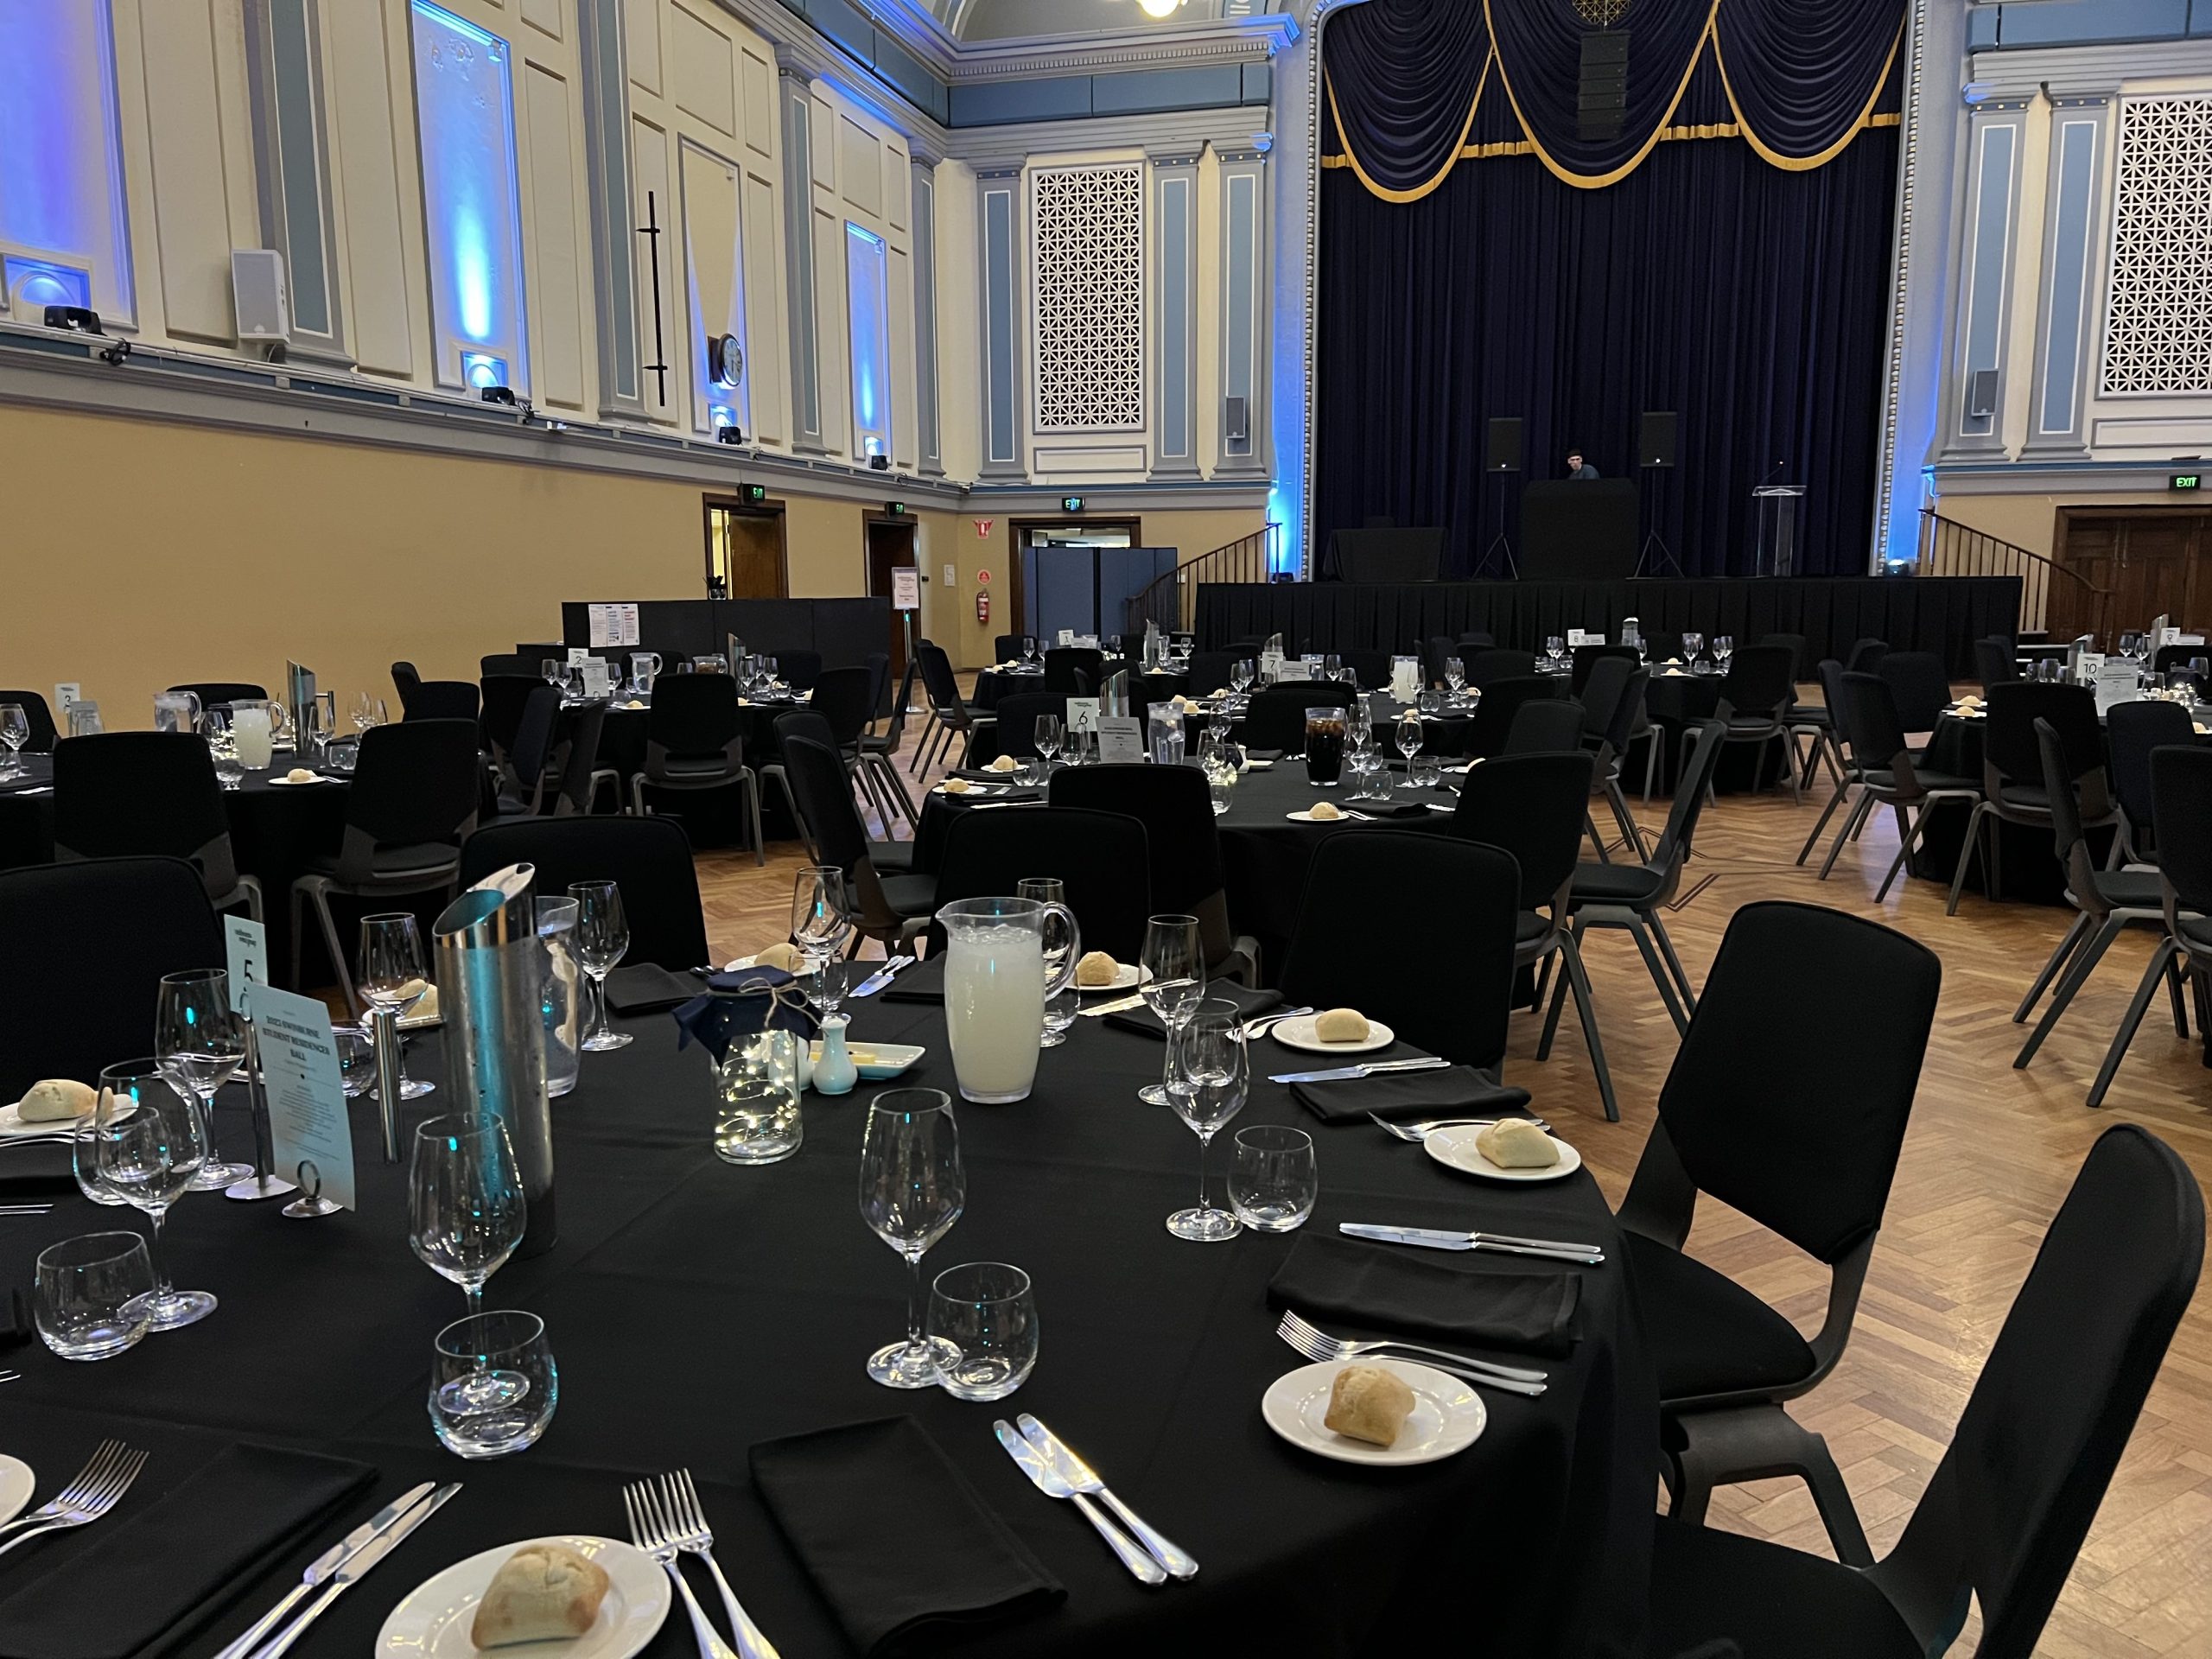 A spacious room at Malvern Town Hall events, filled with tables and chairs for a grand banque